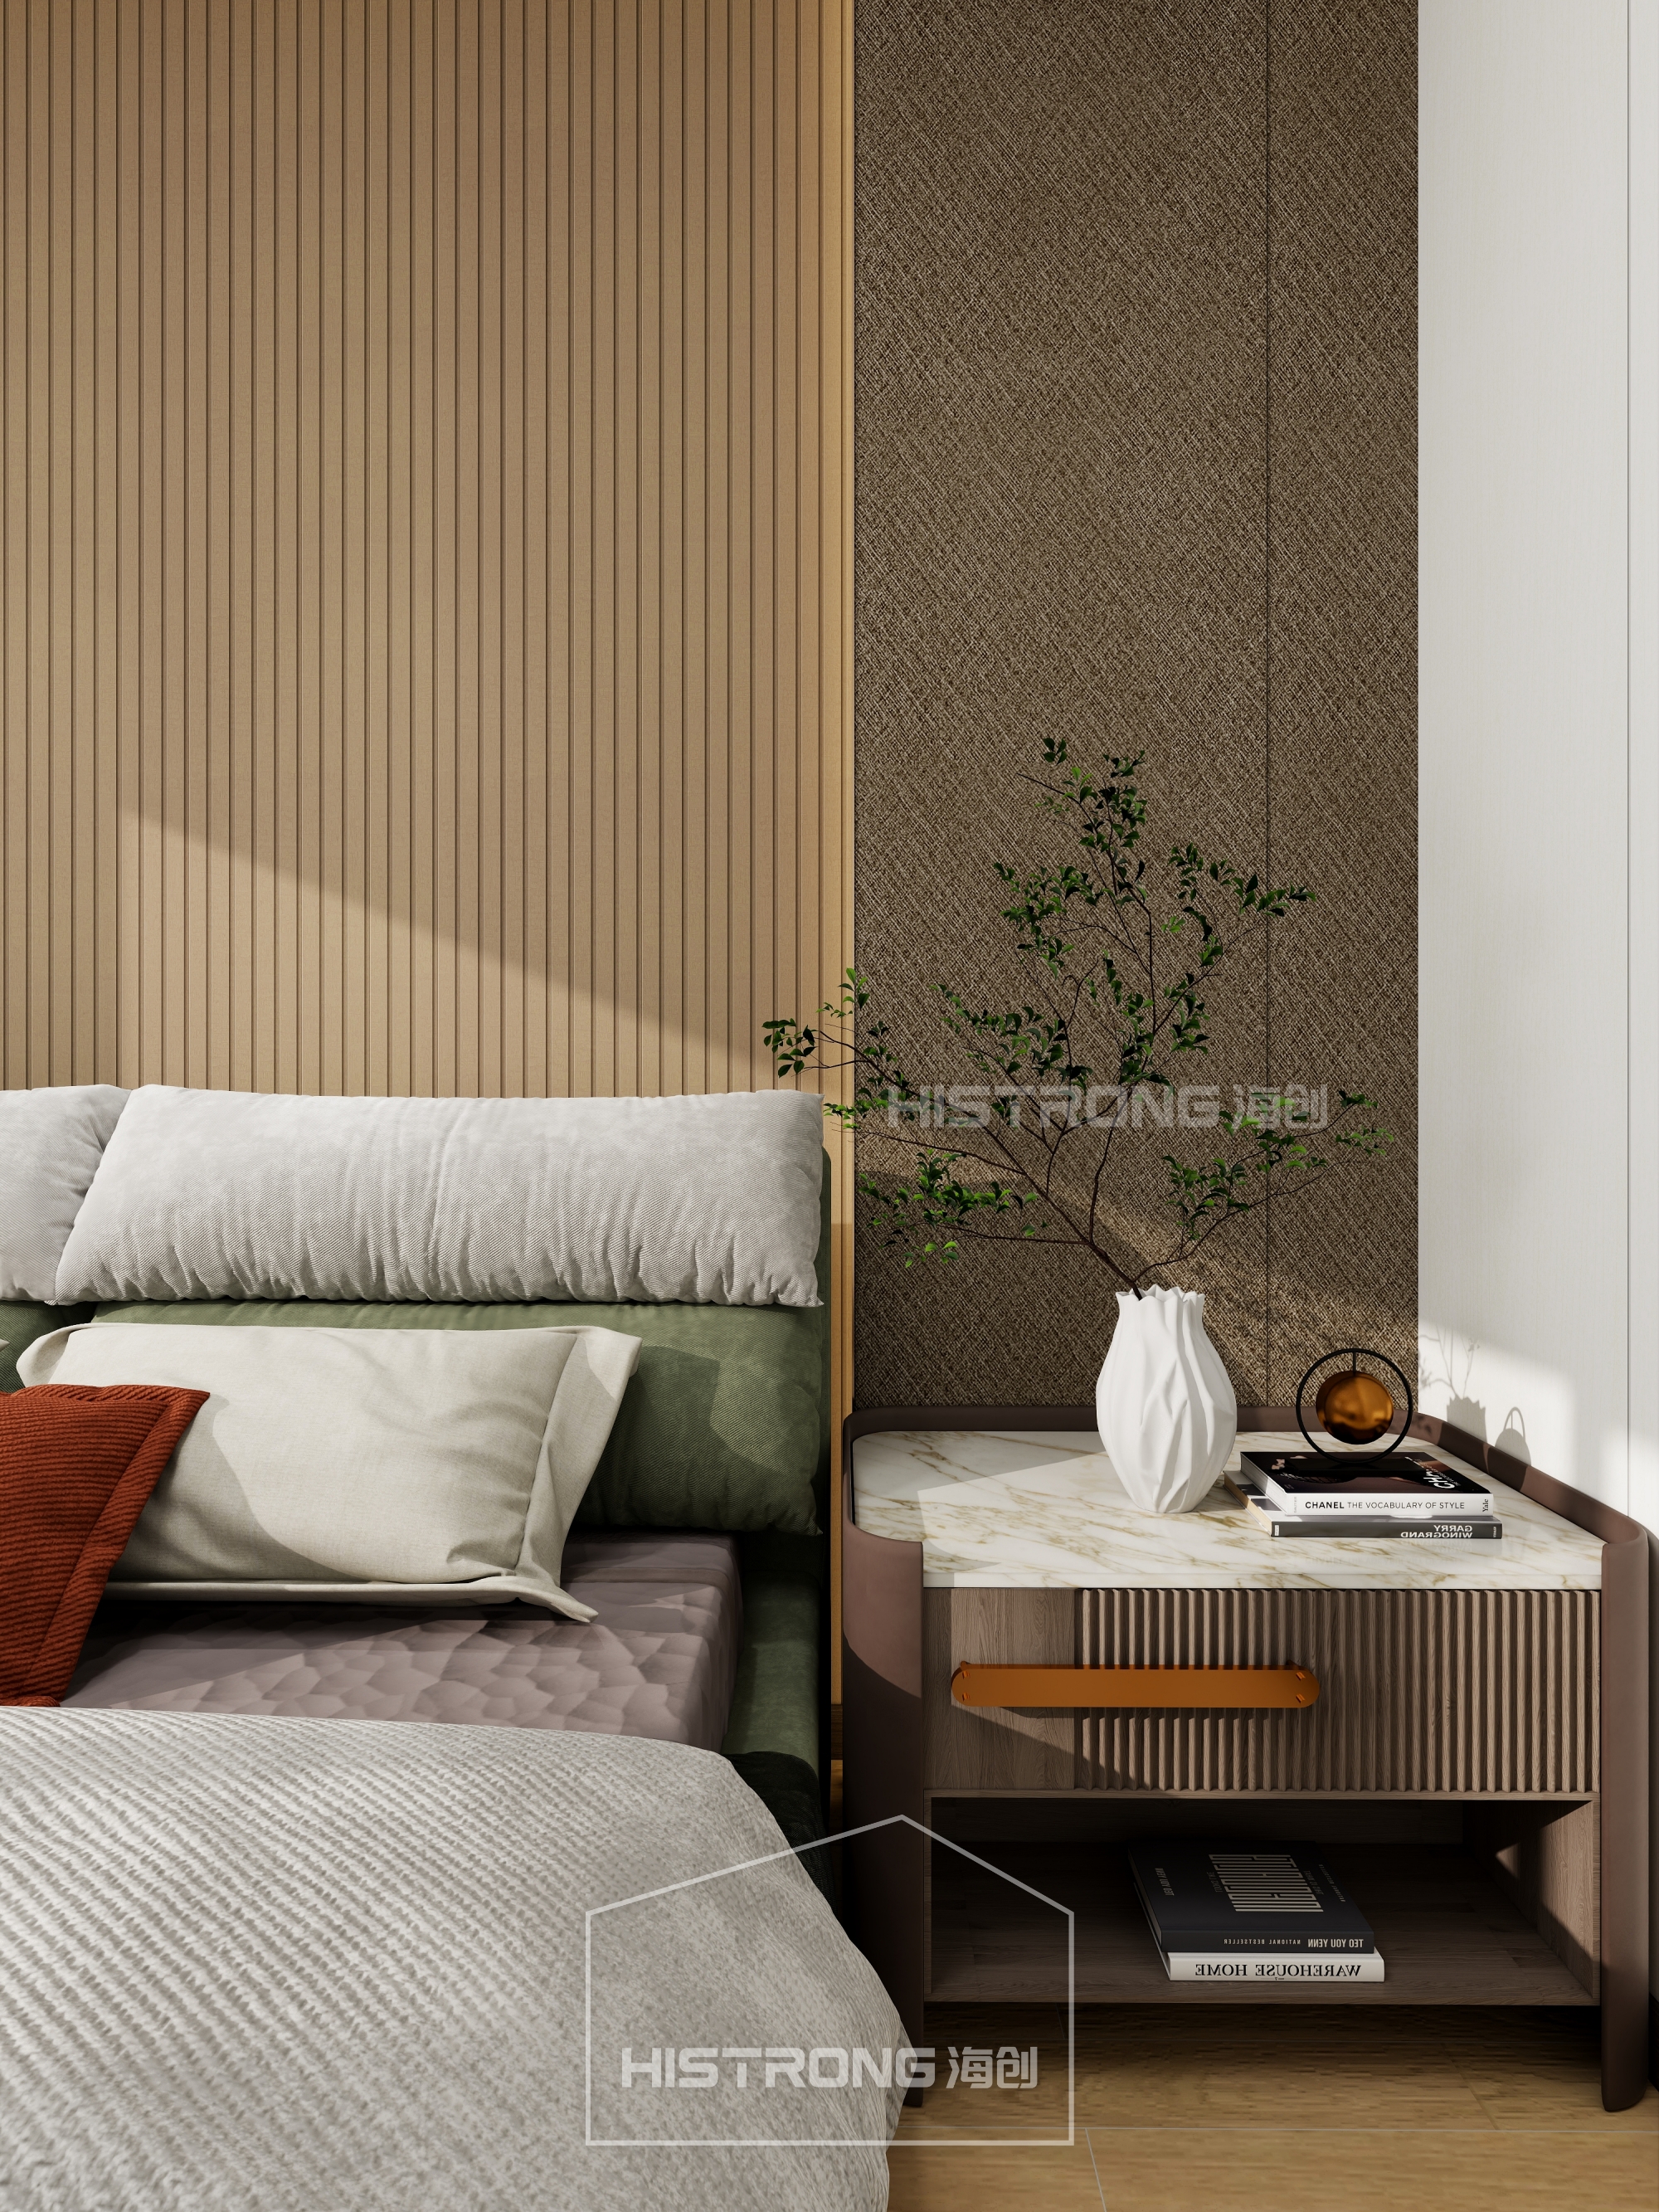 HISTRONG Malaysia No #1 Eco Wall Panel, Best Feature Wall in Malaysia.